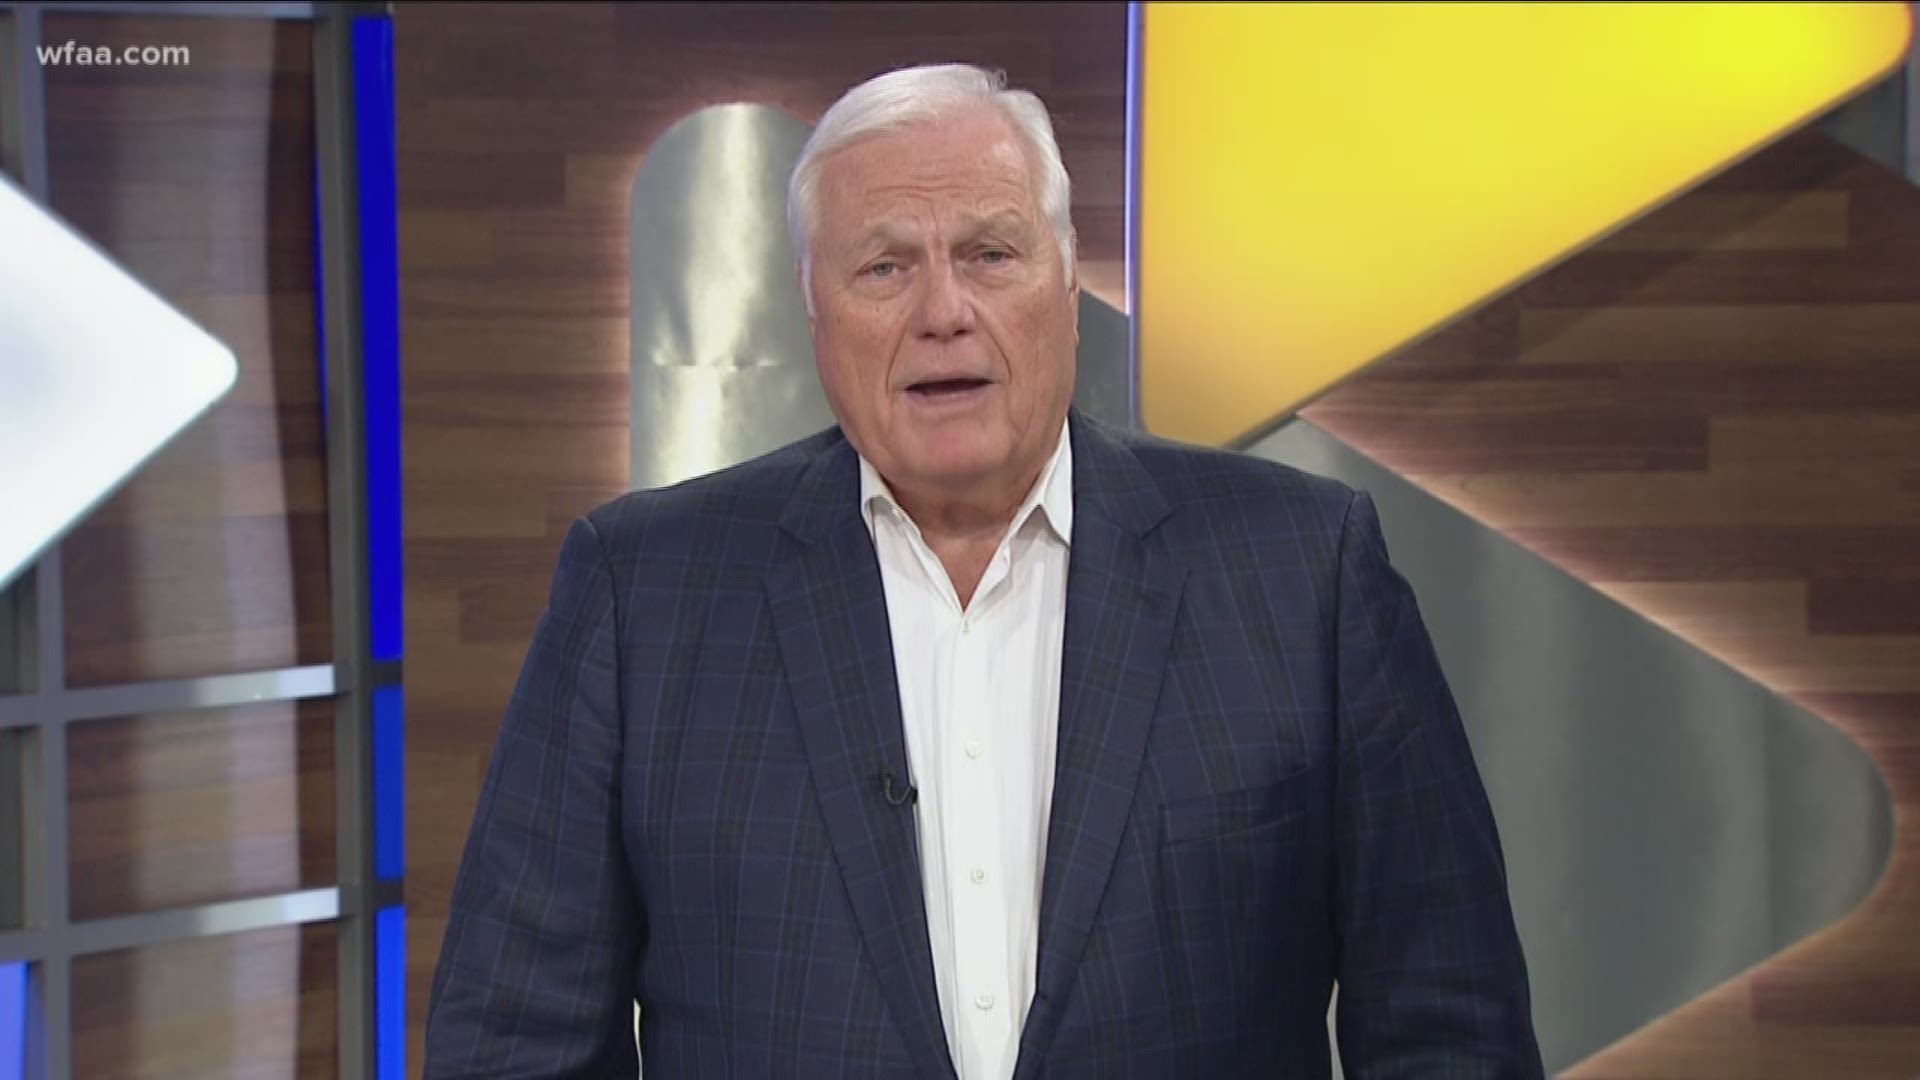 Dale Hansen gives his take on Nike's new ad featuring Colin Kaepernick.